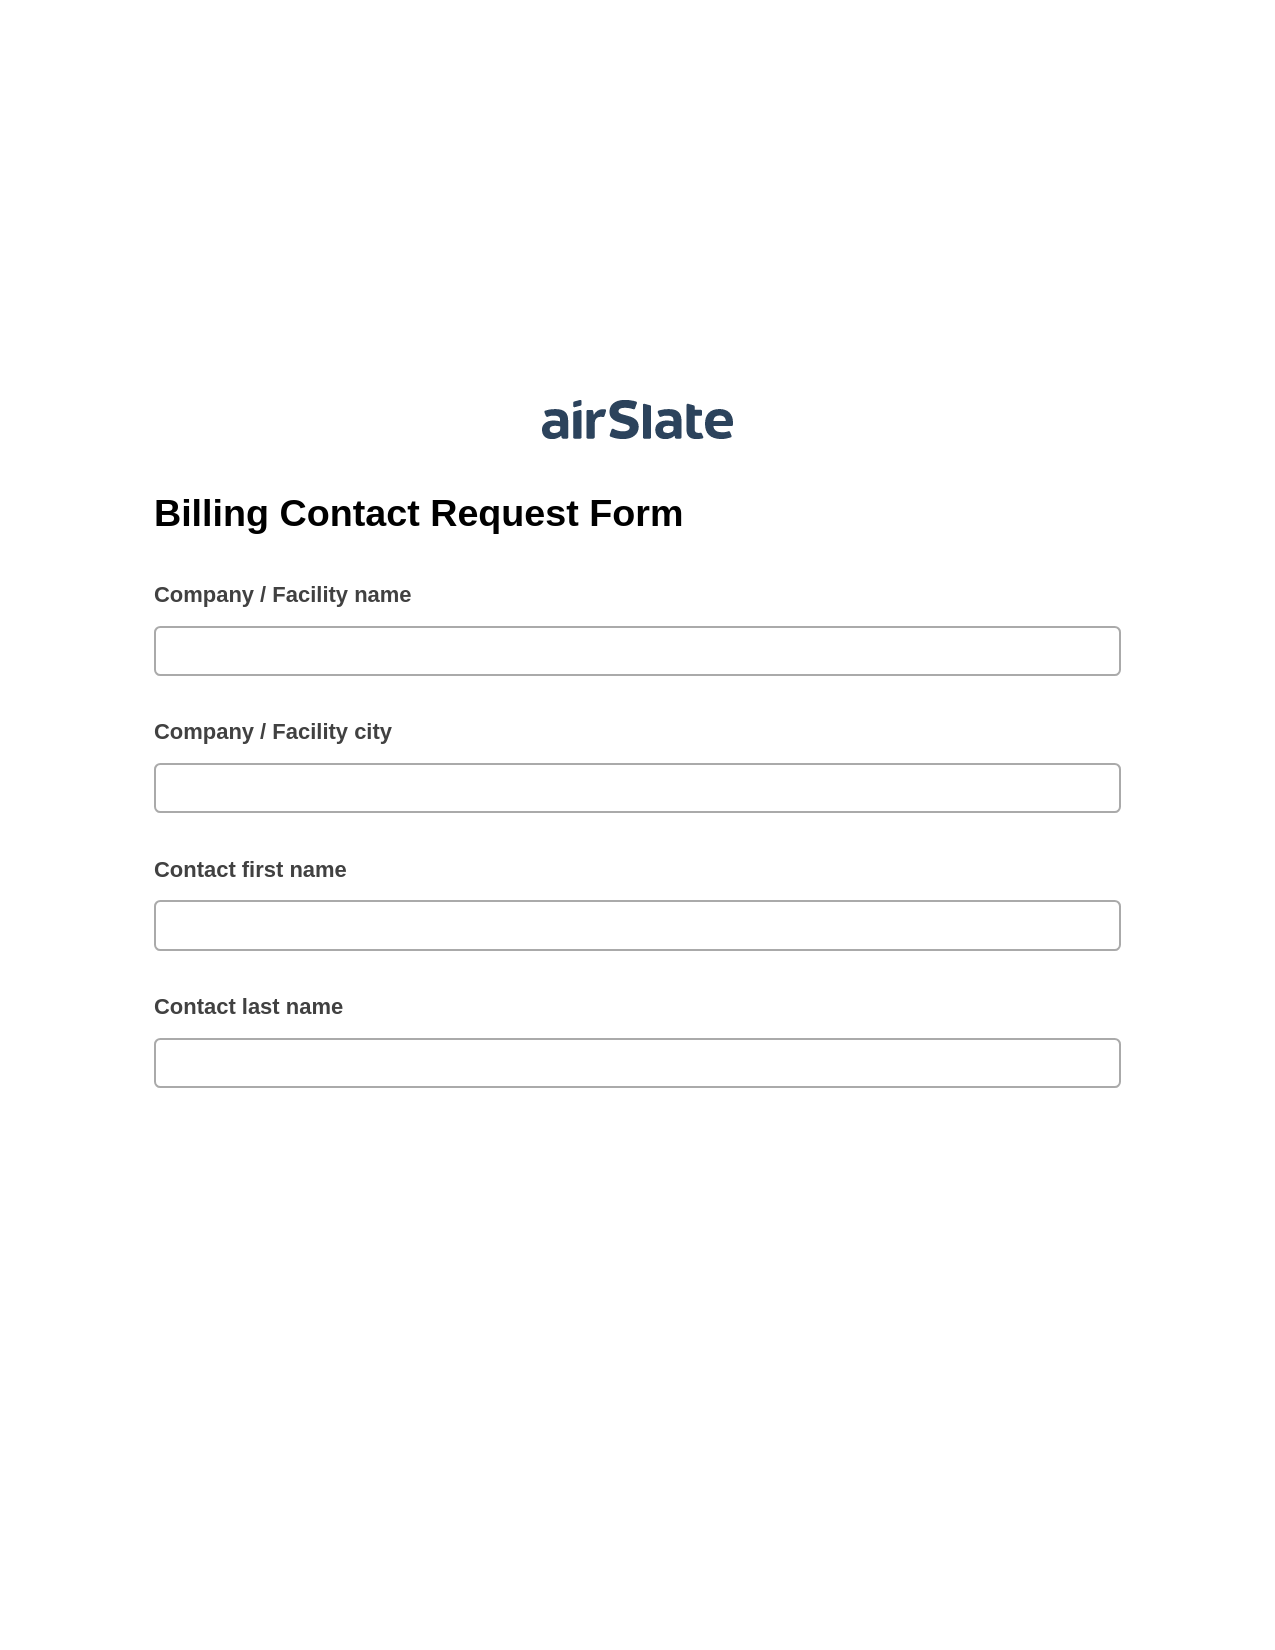 Billing Contact Request Form Pre-fill Slate from MS Dynamics 365 Records Bot, Audit Trail Bot, Box Bot